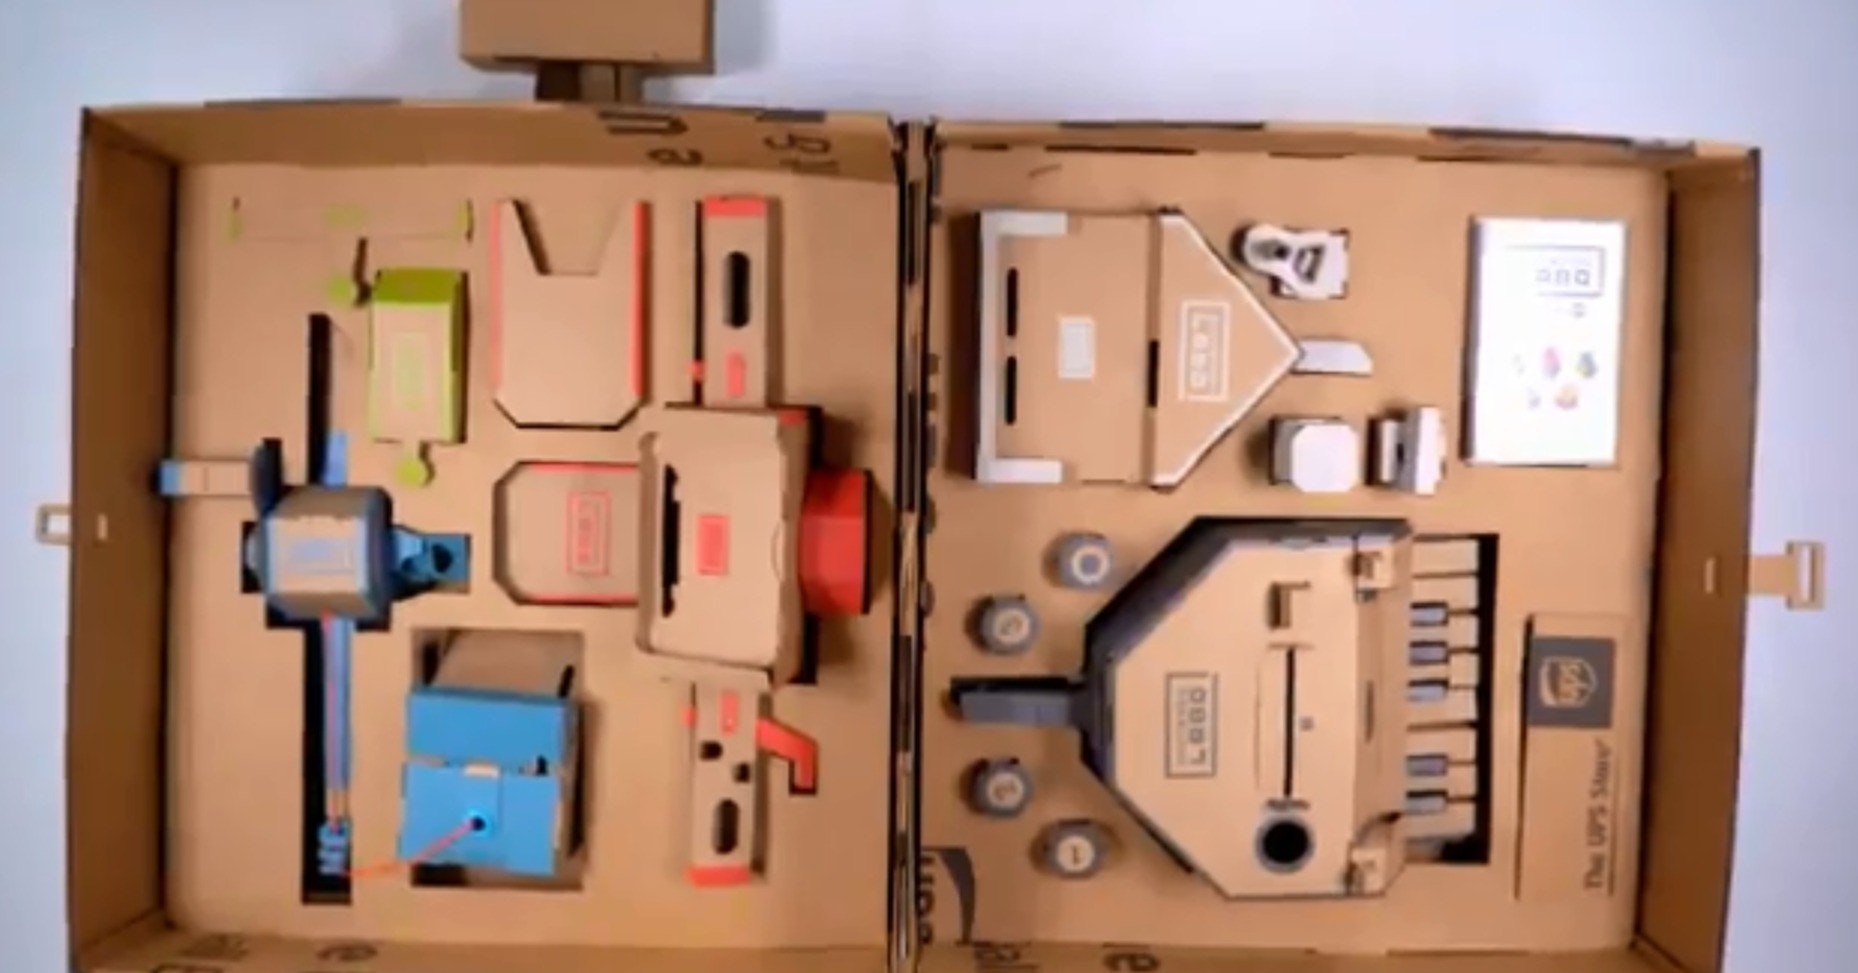 Nintendo Labo, Wii, Final Fantasy, Nintendo, , Video game, The Last Story, Video Game Consoles, PlayStation 4, Xbox 360, Nintendo Labo, product, product design, home, furniture, electrical wiring